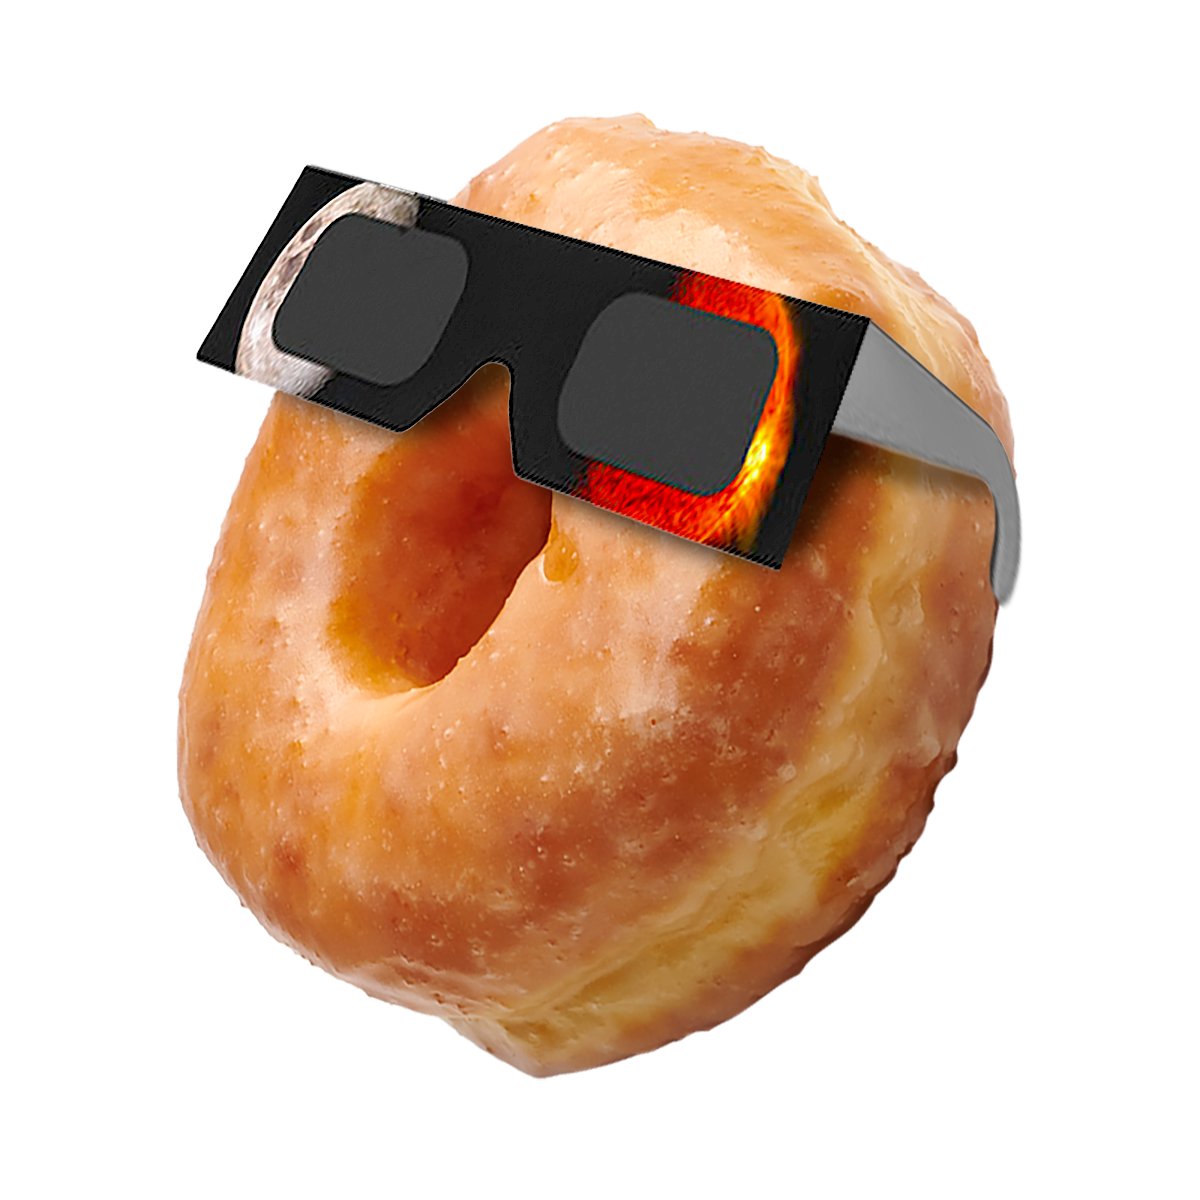 Do-nut forget your essentials for the eclipse…stop by today!